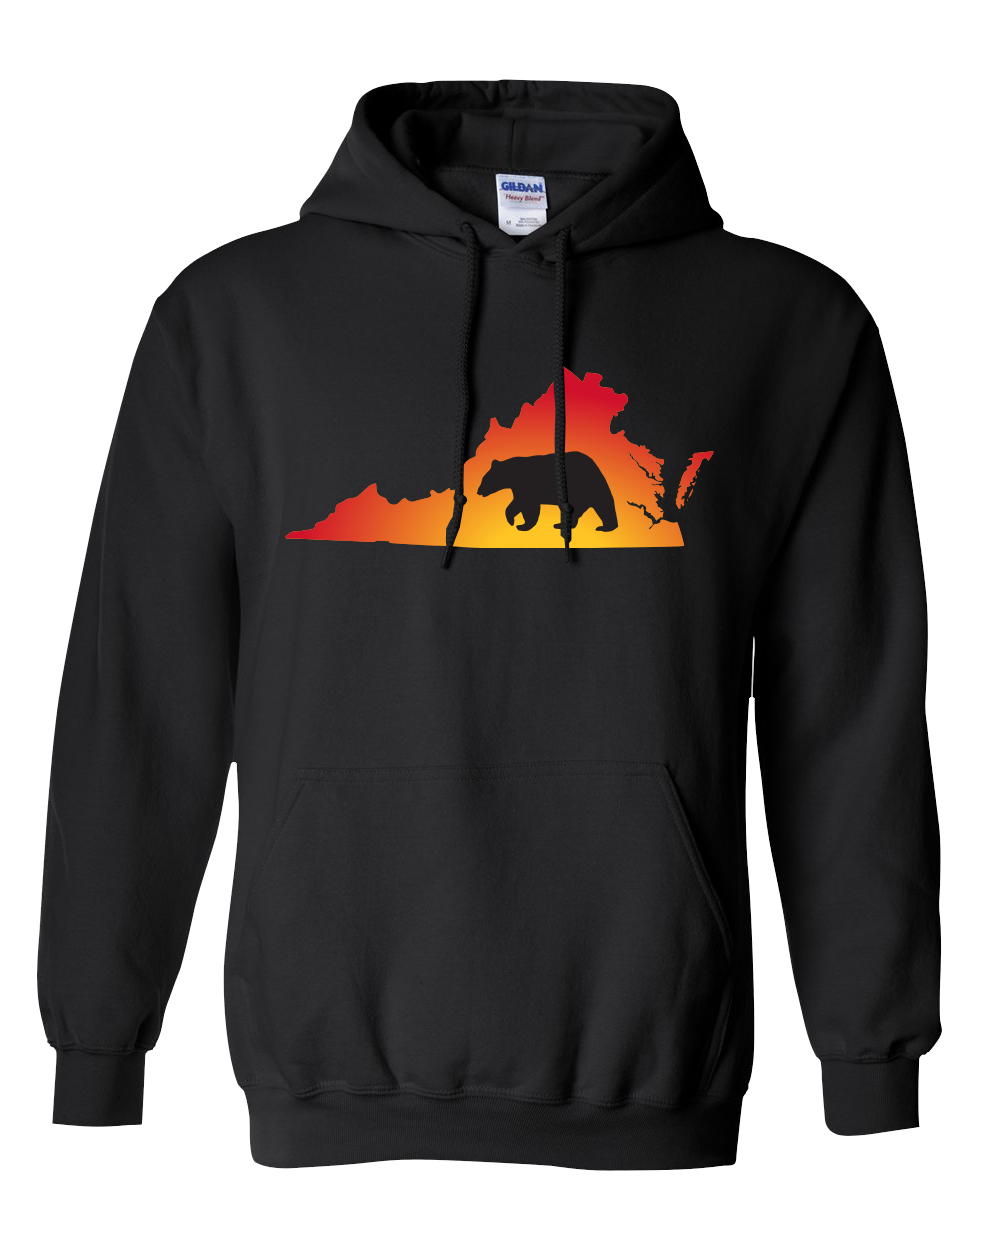 Pullover Hooded Sweatshirt Virginia Black Black Bear Vibrant Design High Quality Tight Knit Ring Spun Low Maintenance Cotton Printed With The Newest Available Color Transfer Technology